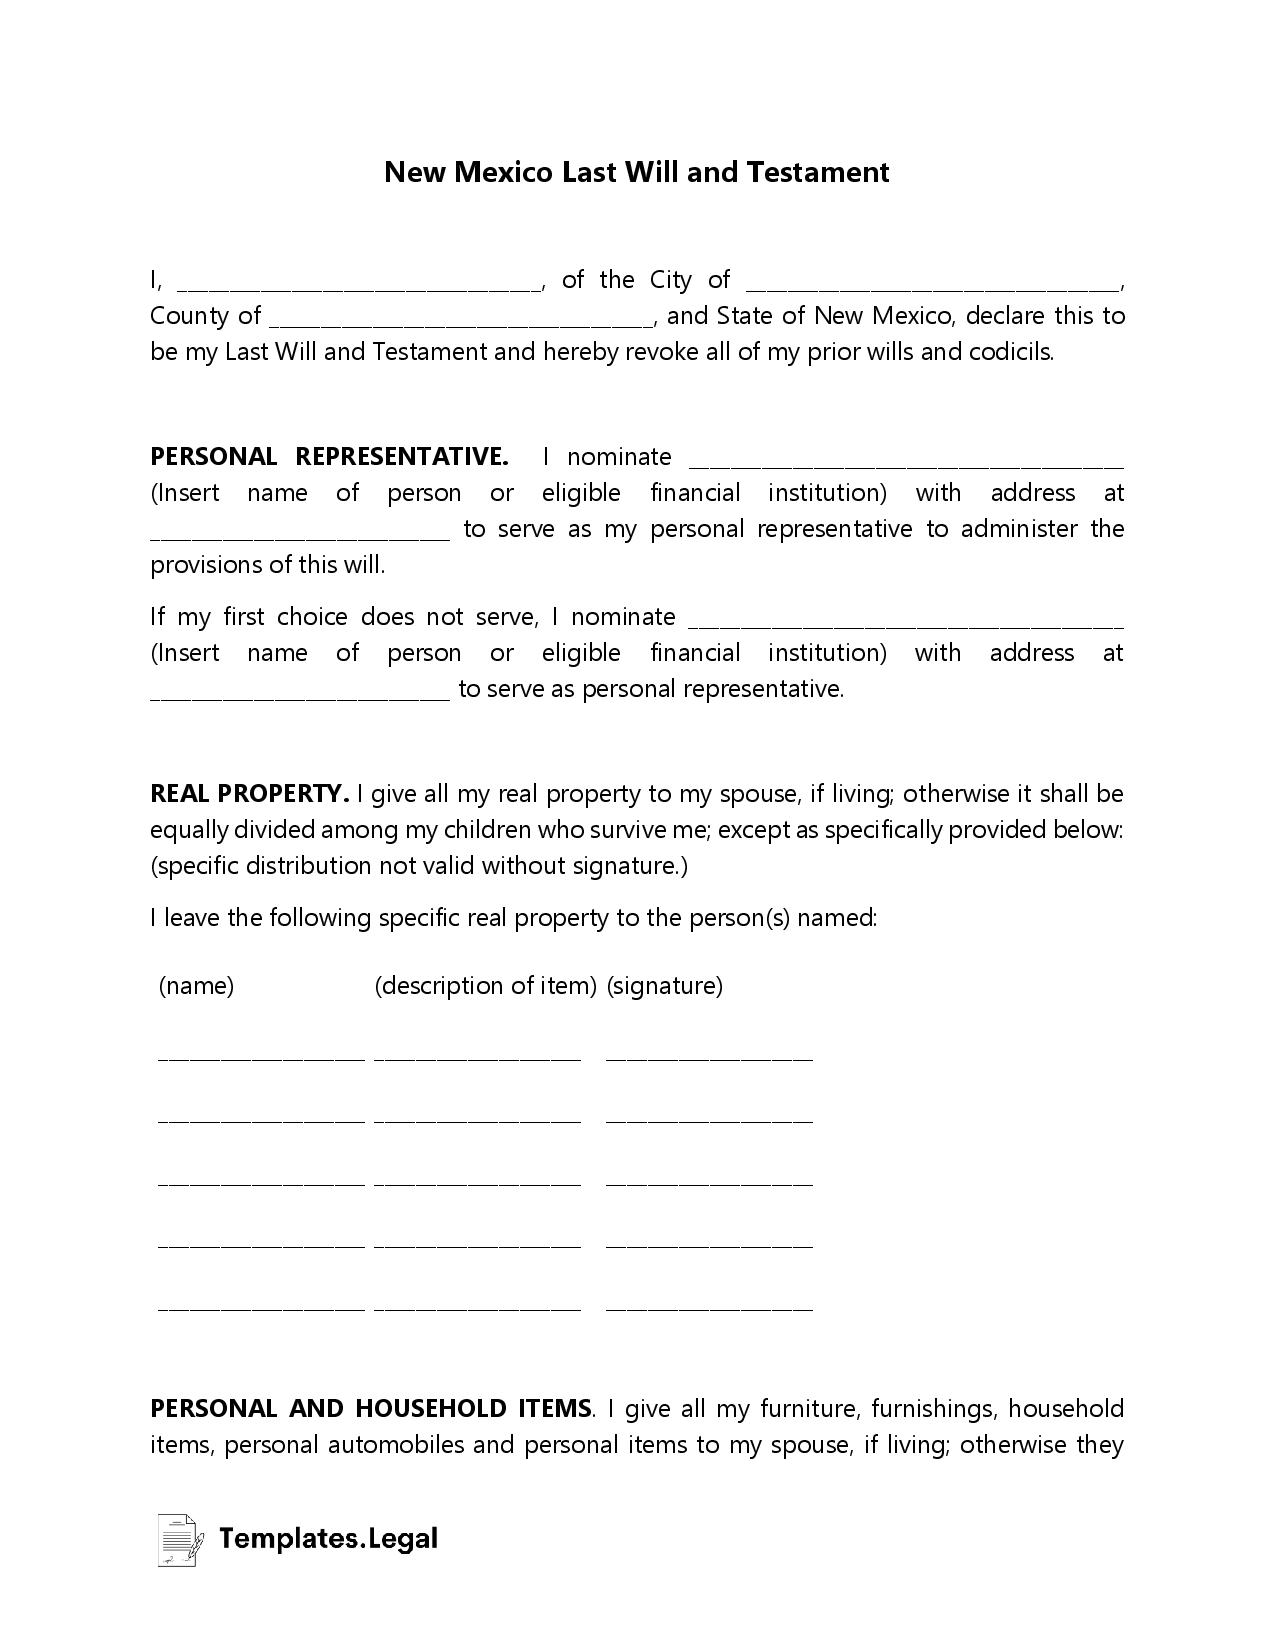 New Mexico Last Will and Testament - Templates.Legal